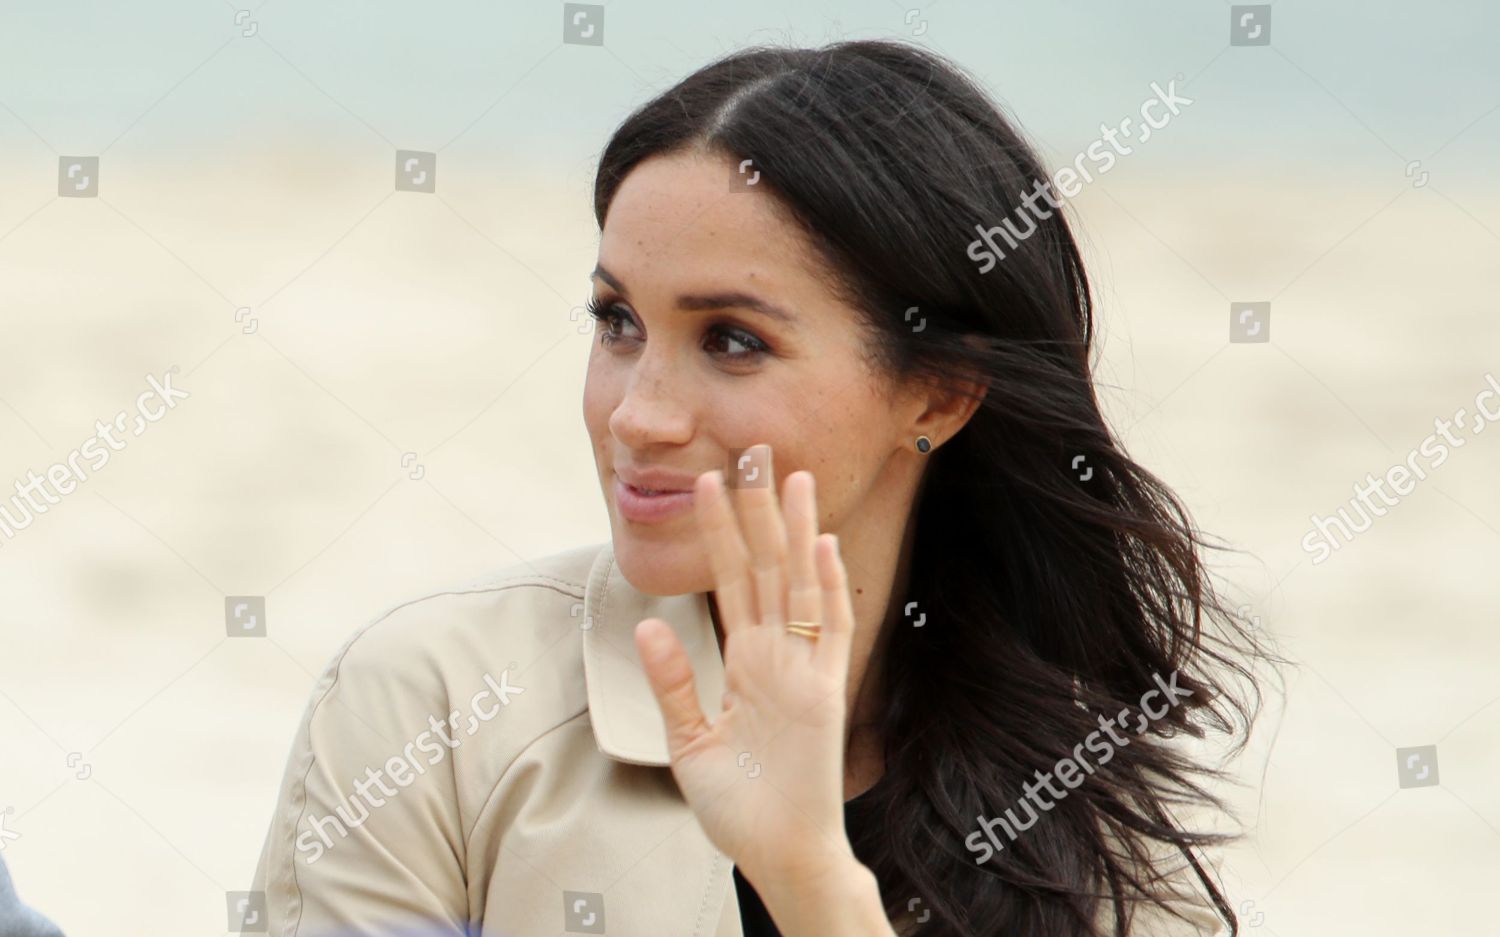 prince-harry-and-meghan-duchess-of-sussex-tour-of-australia-shutterstock-editorial-9936539dy.jpg